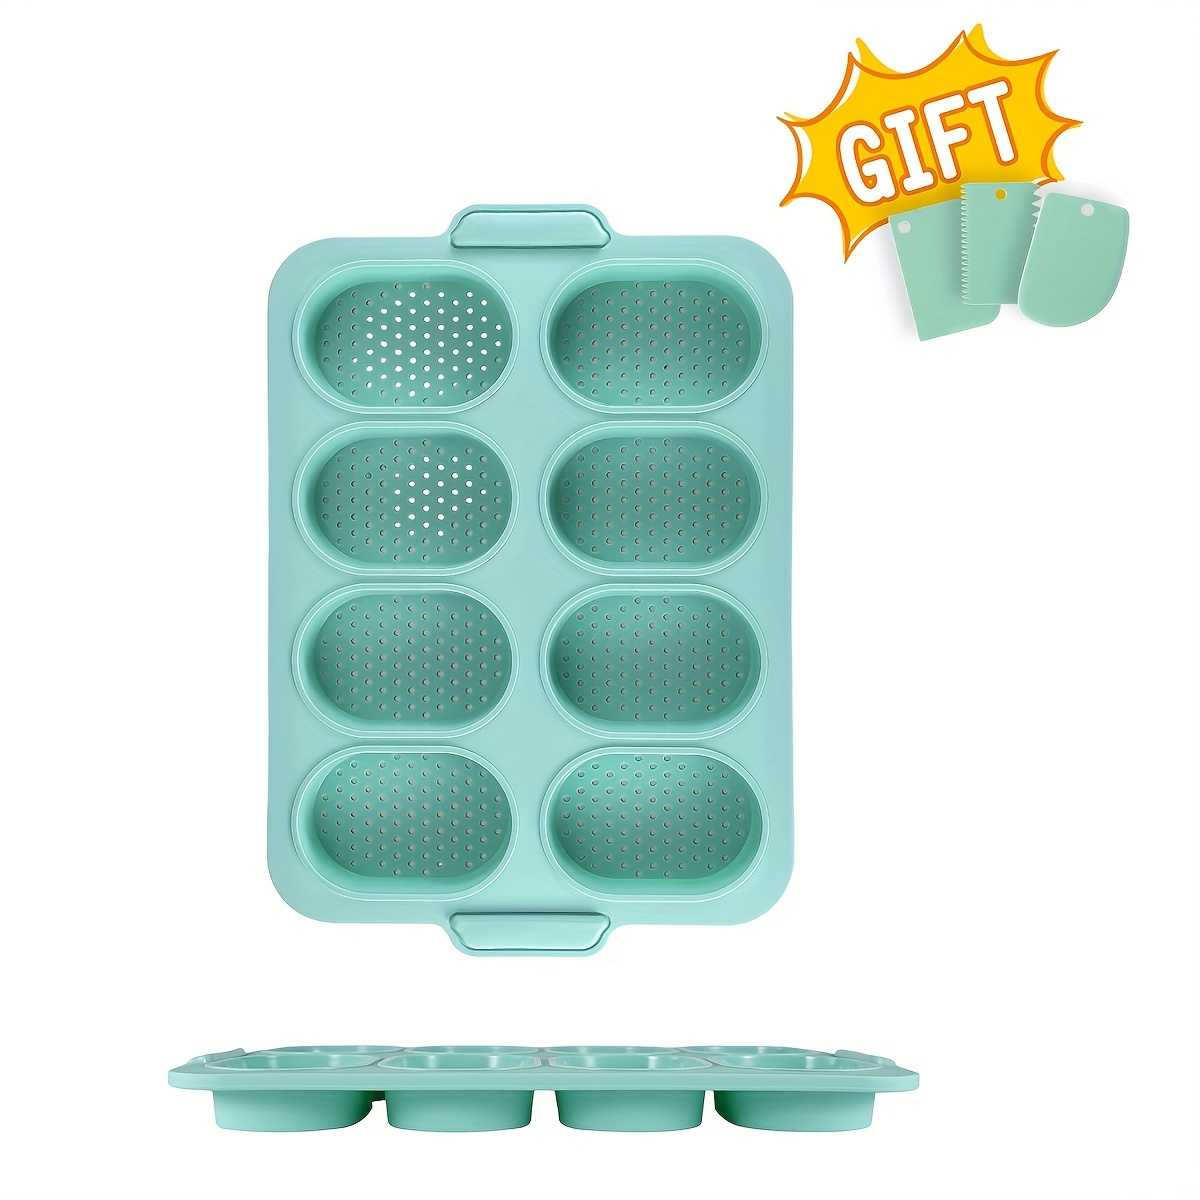 8-cavity Silicone Mini Loaf Pan - Perfect For Baking Baguettes